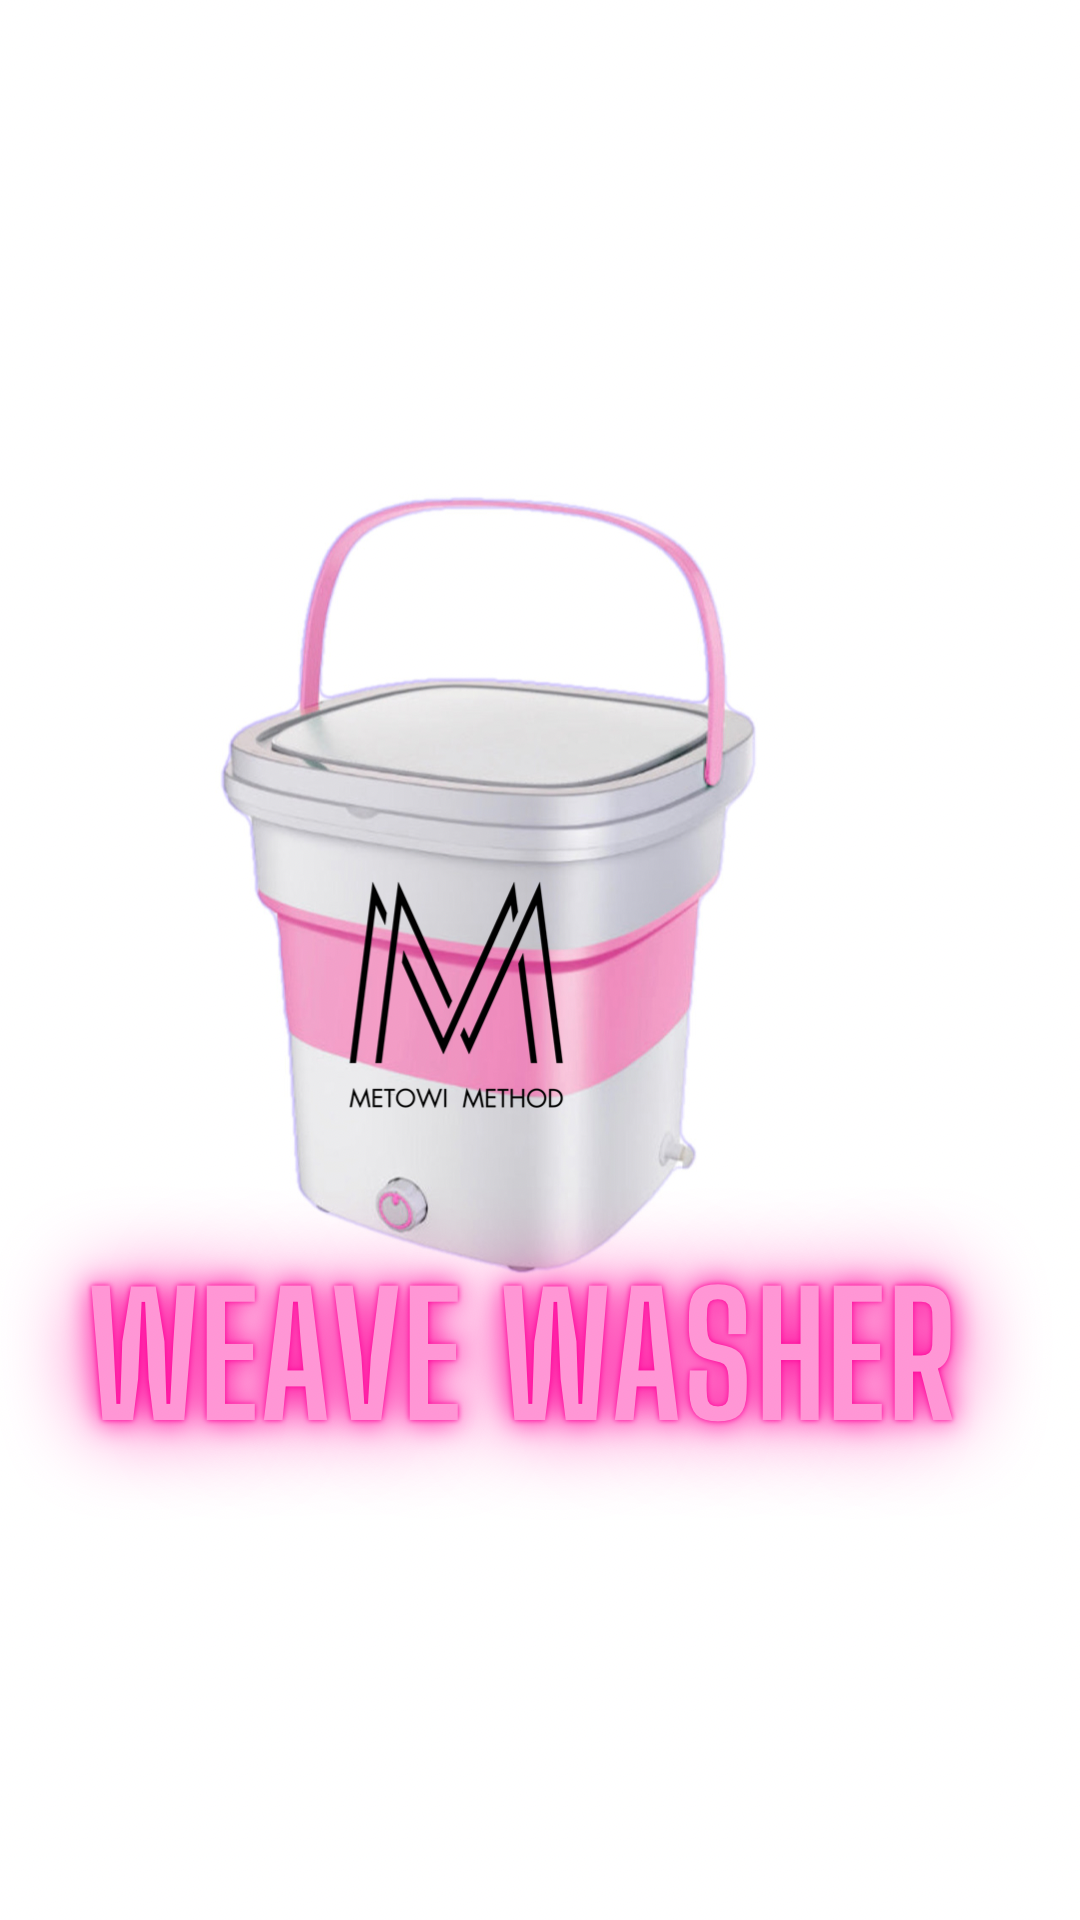 Weave Washer